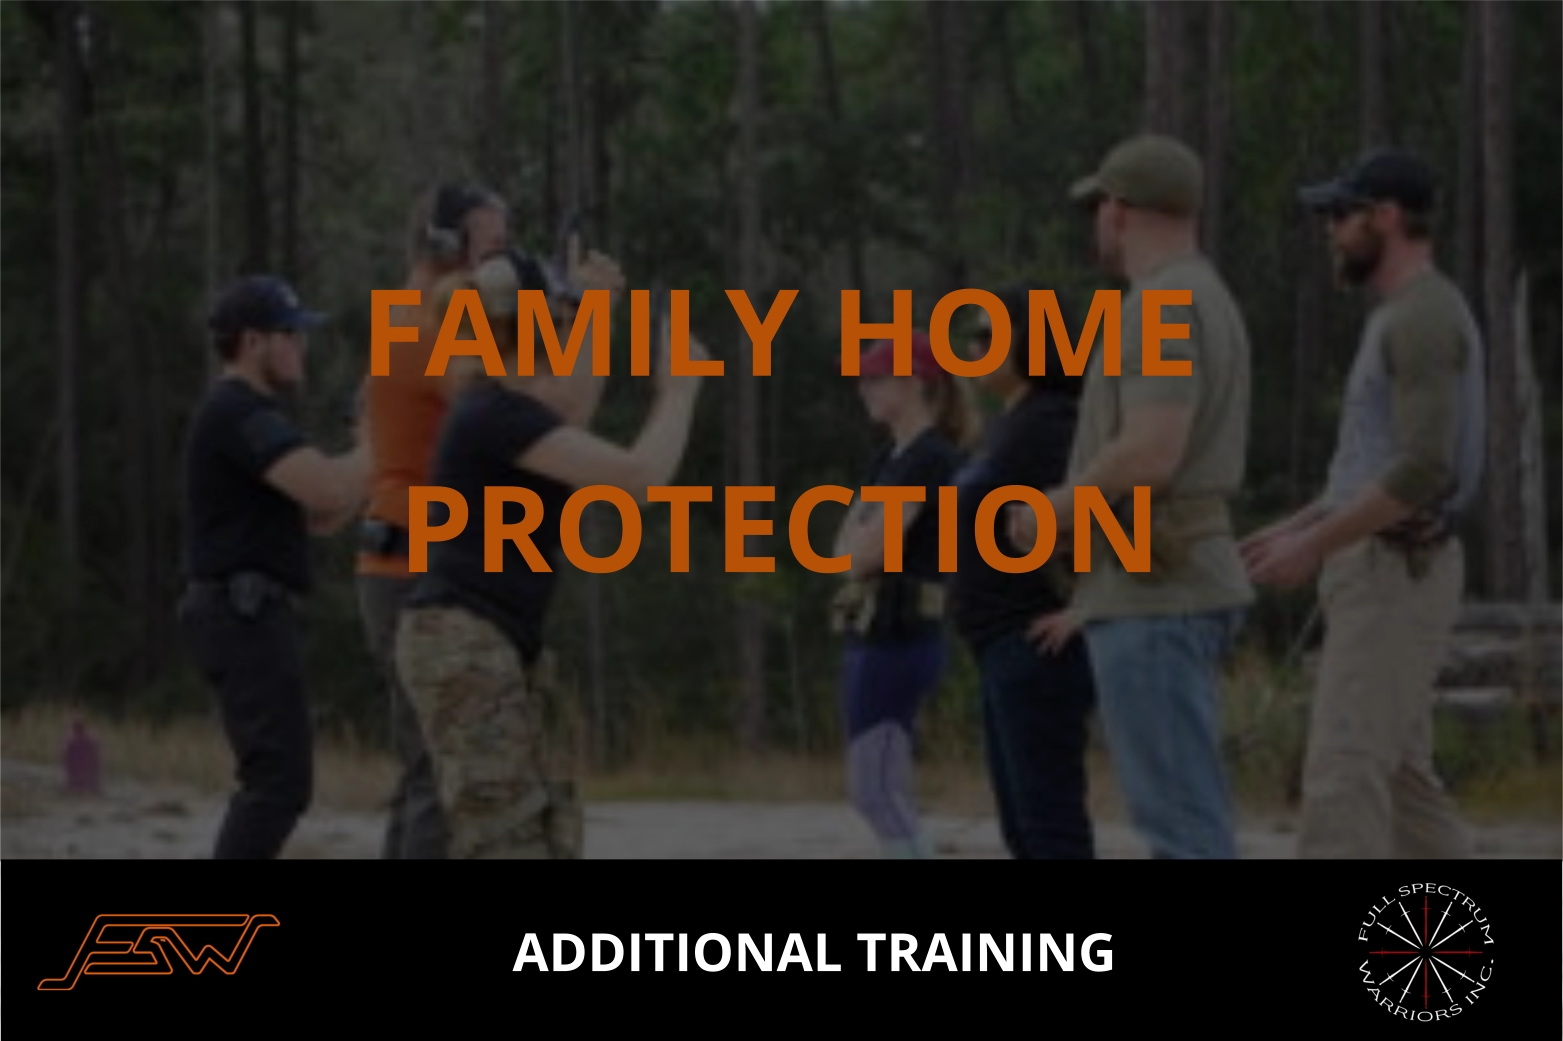 FAMILY HOME PROTECTION